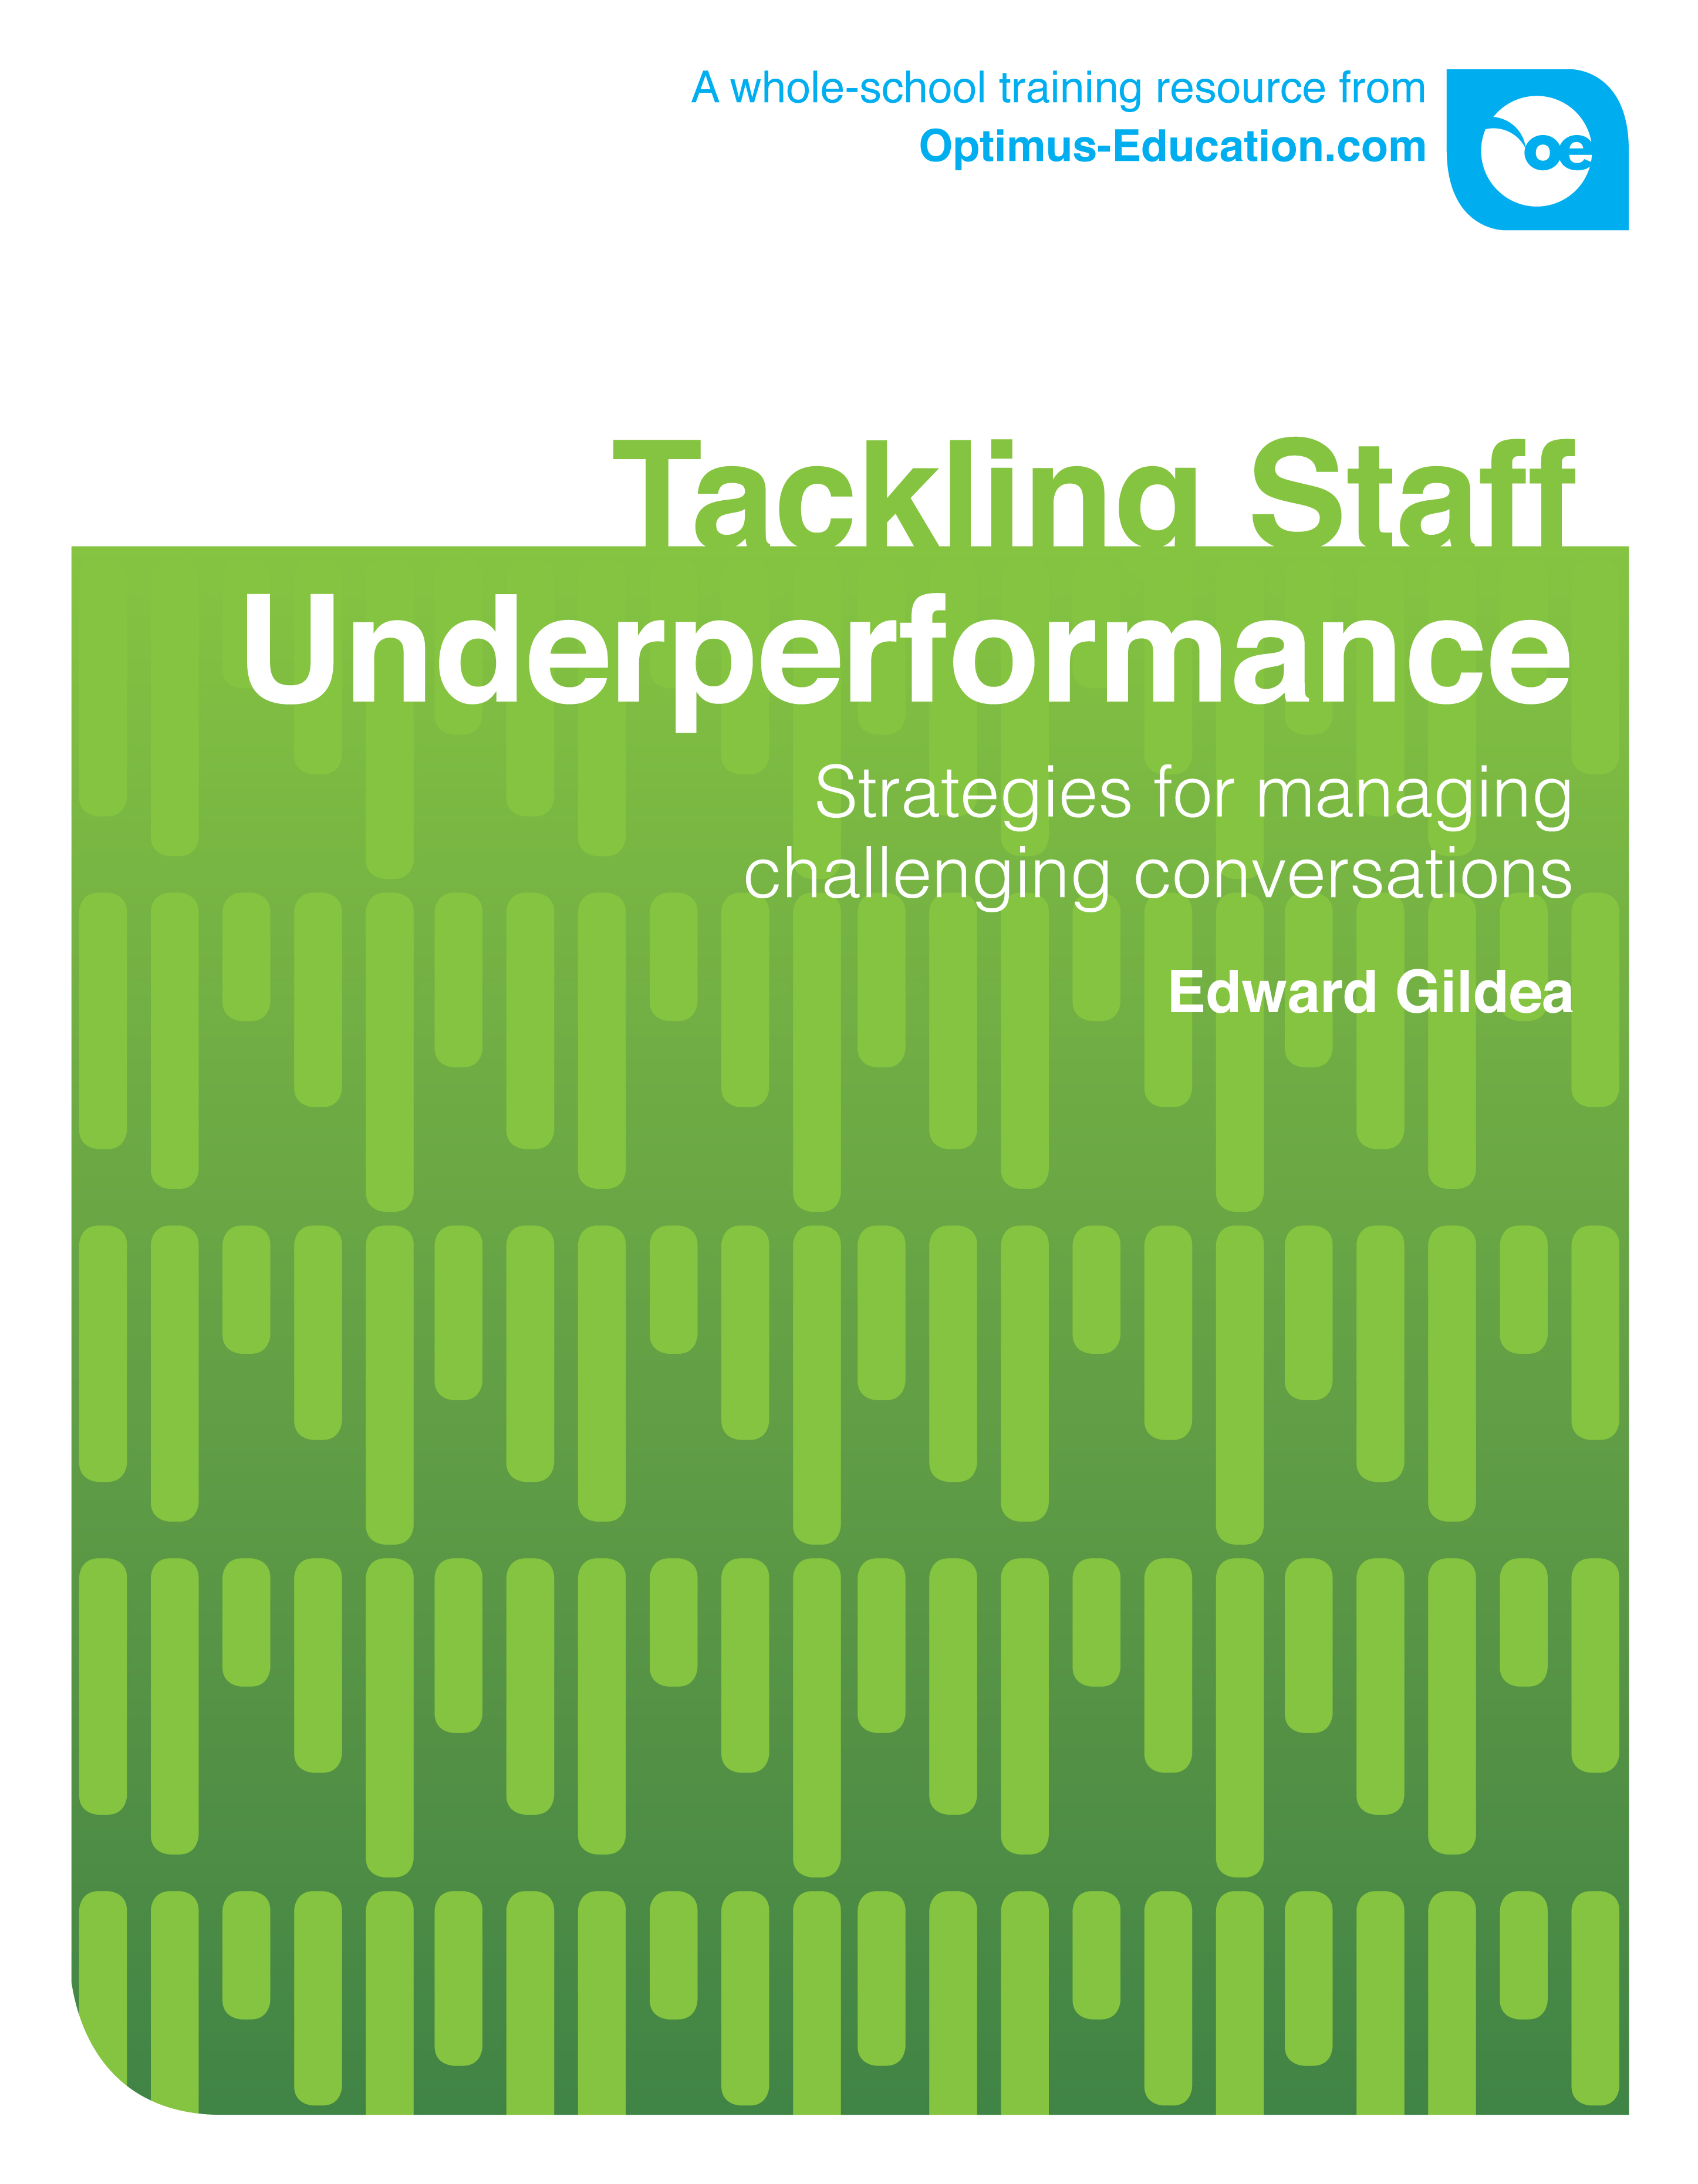 Tackling Staff Underperformance: Strategies for managing challenging conversations